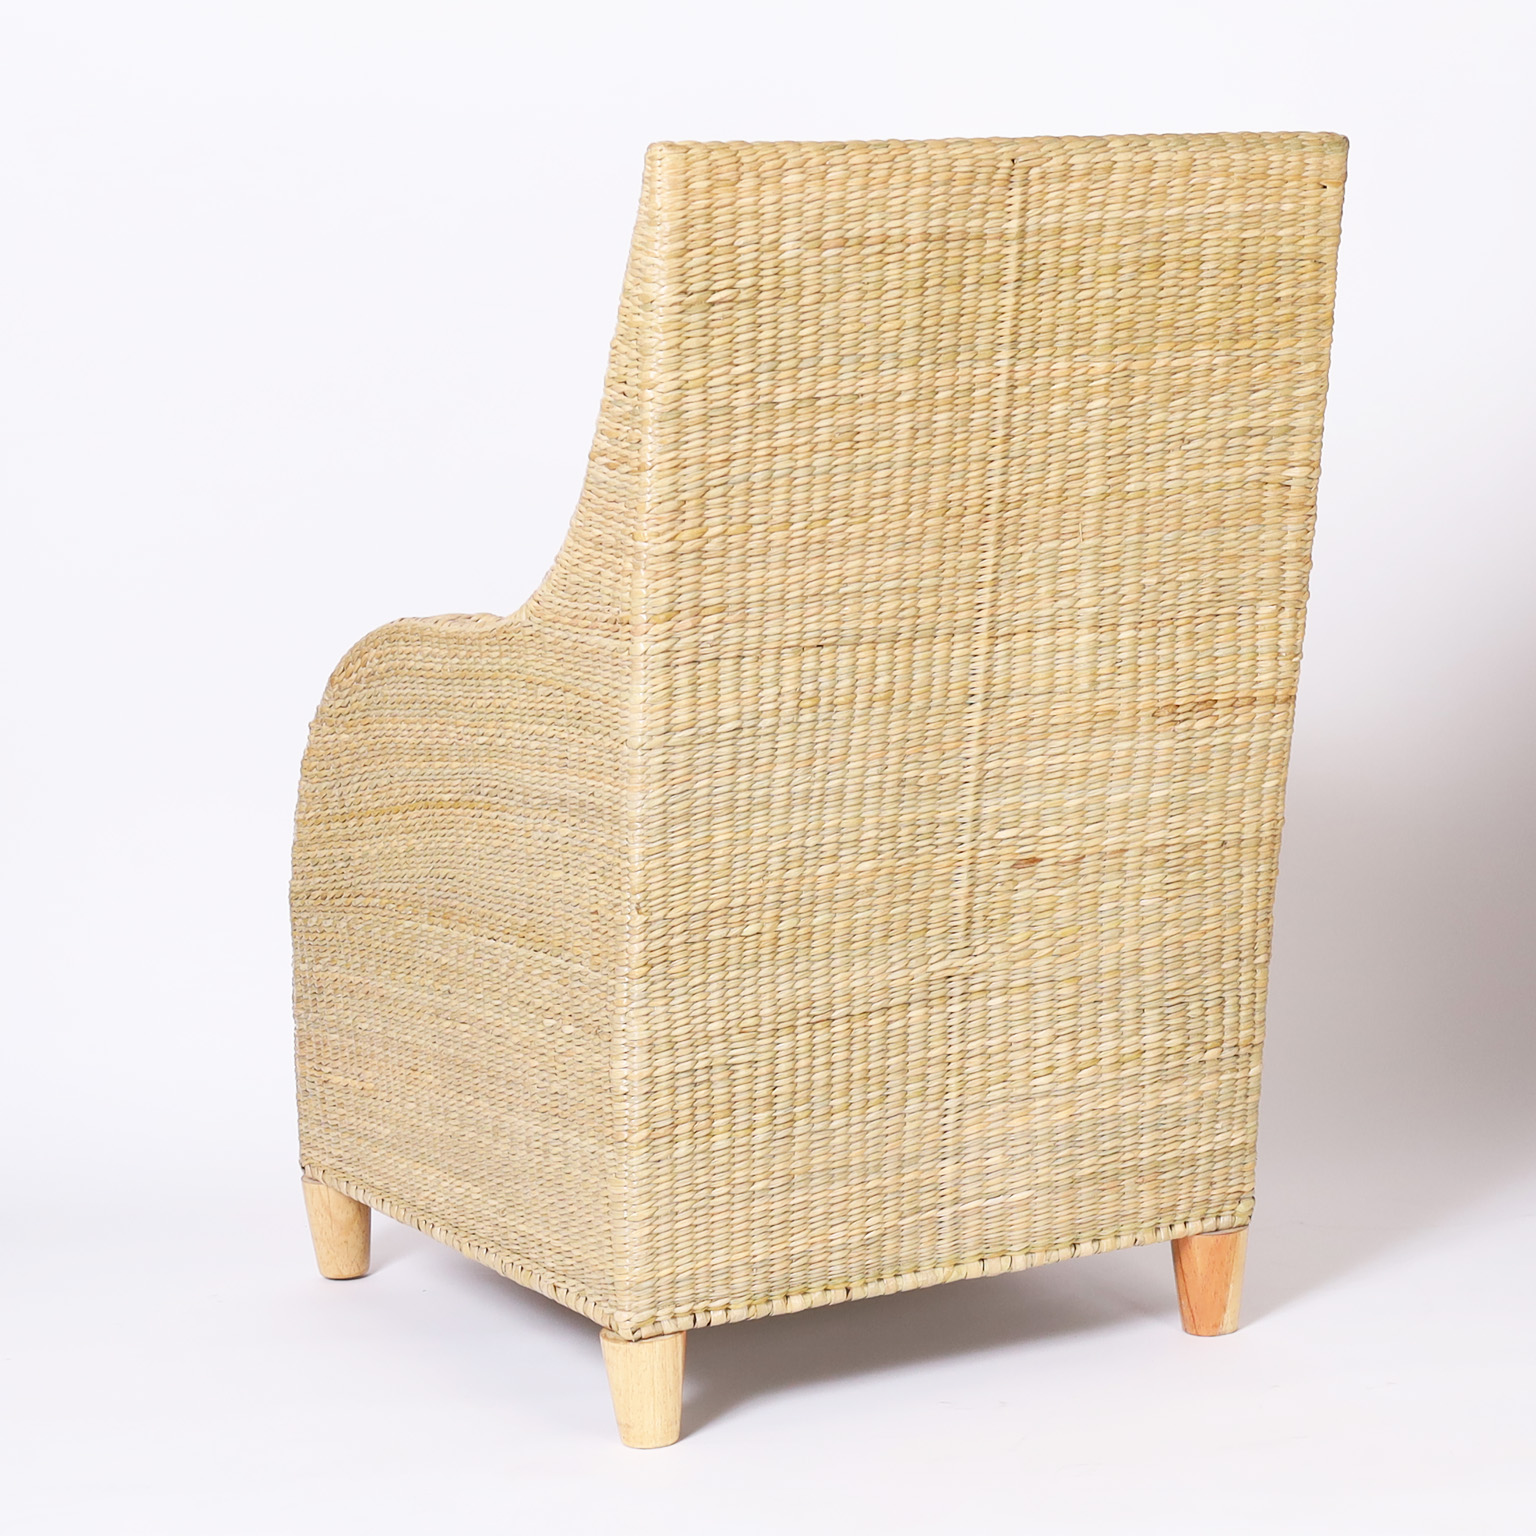 Wicker Armchairs from the FS Flores Collection